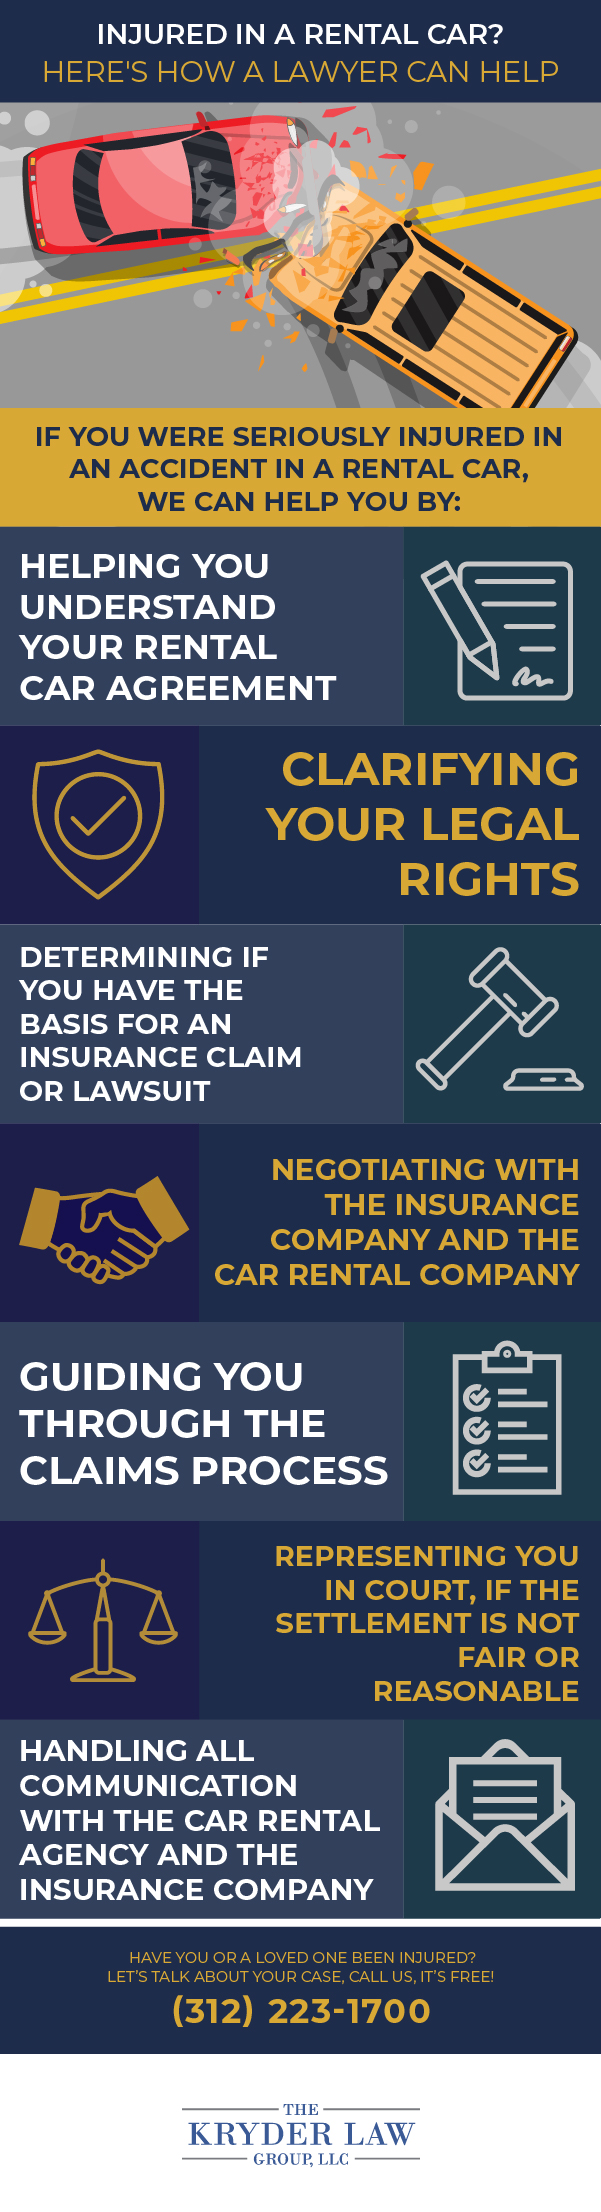 Injured in a Rental Car? Here's How a Lawyer Can Help